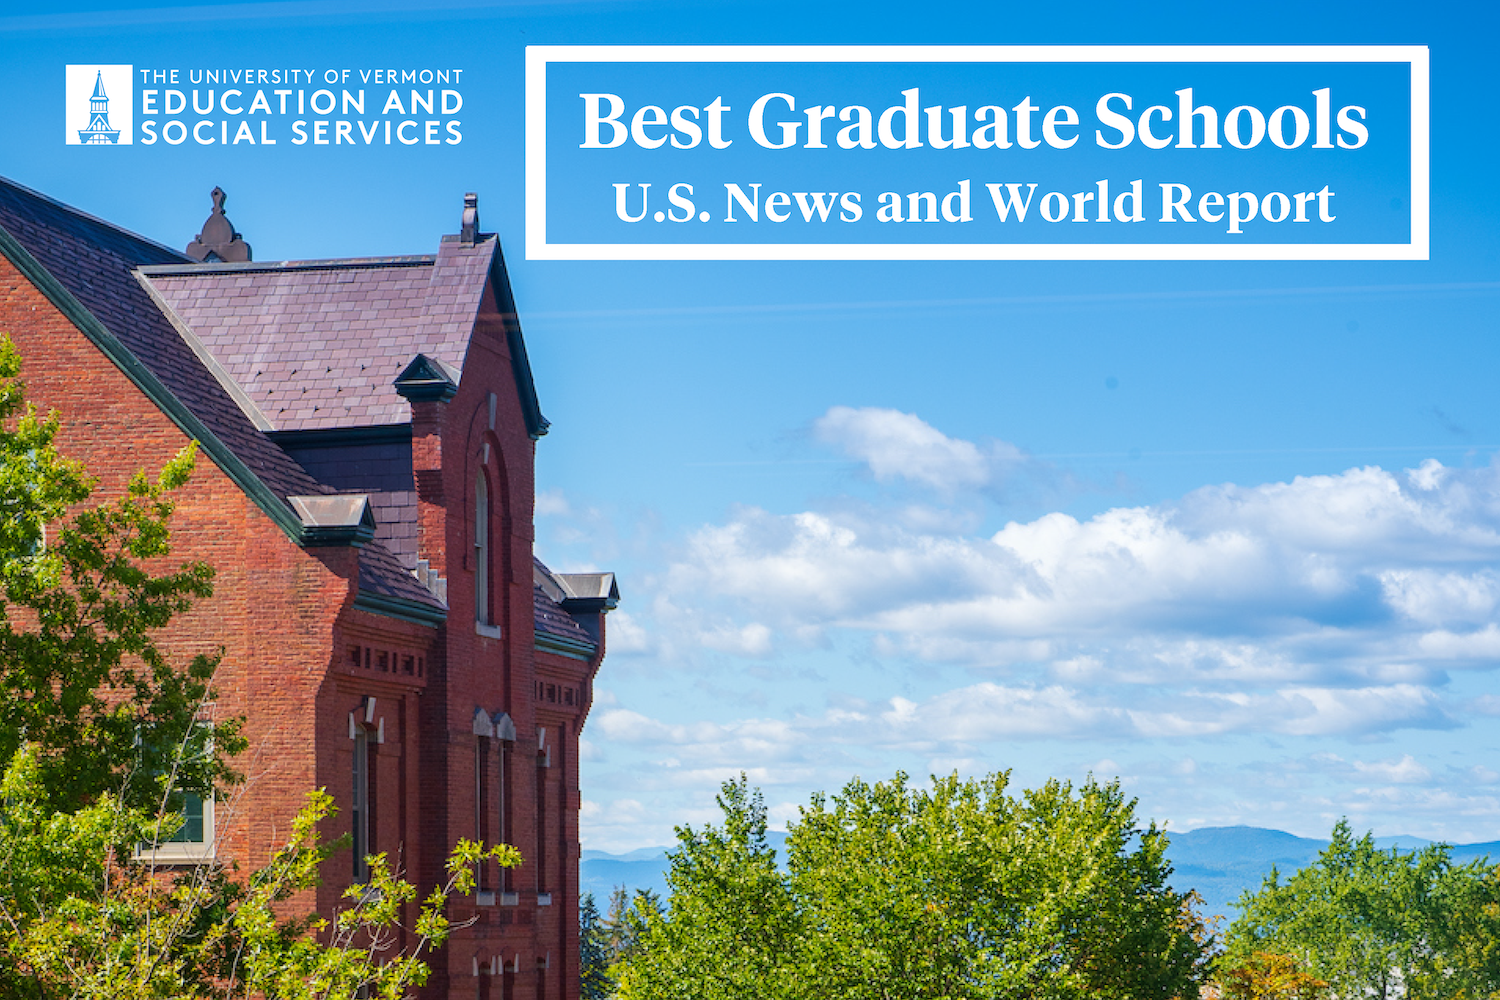 UVM recognized as one of the Best Graduate Schools for Education and Social Work by U.S. News and World Report